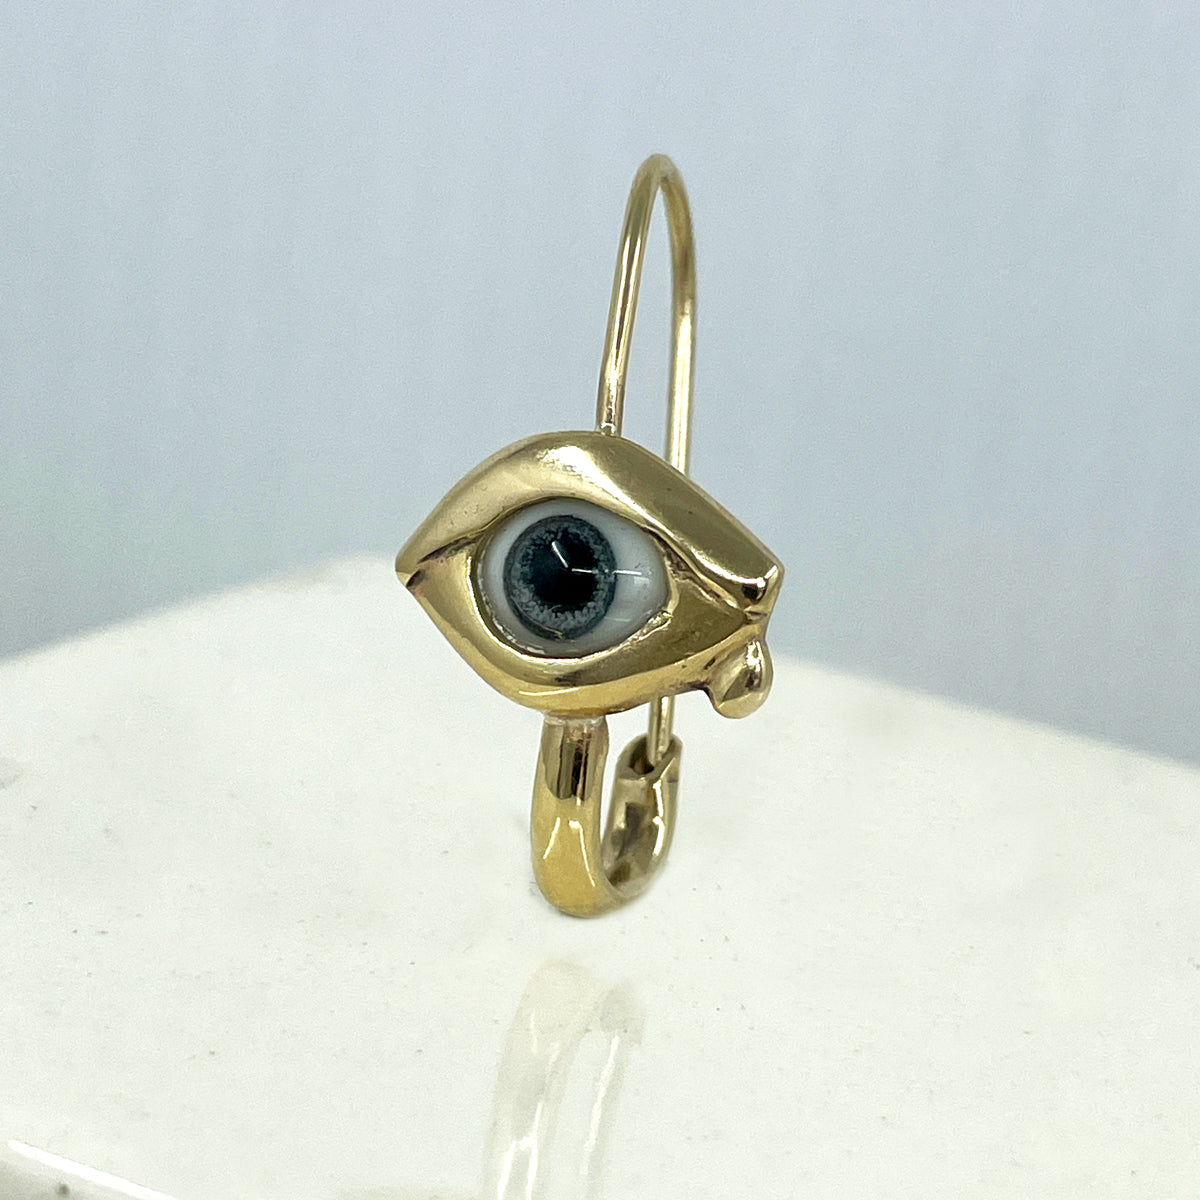 Glass Eye Safety Pin Earring Gold